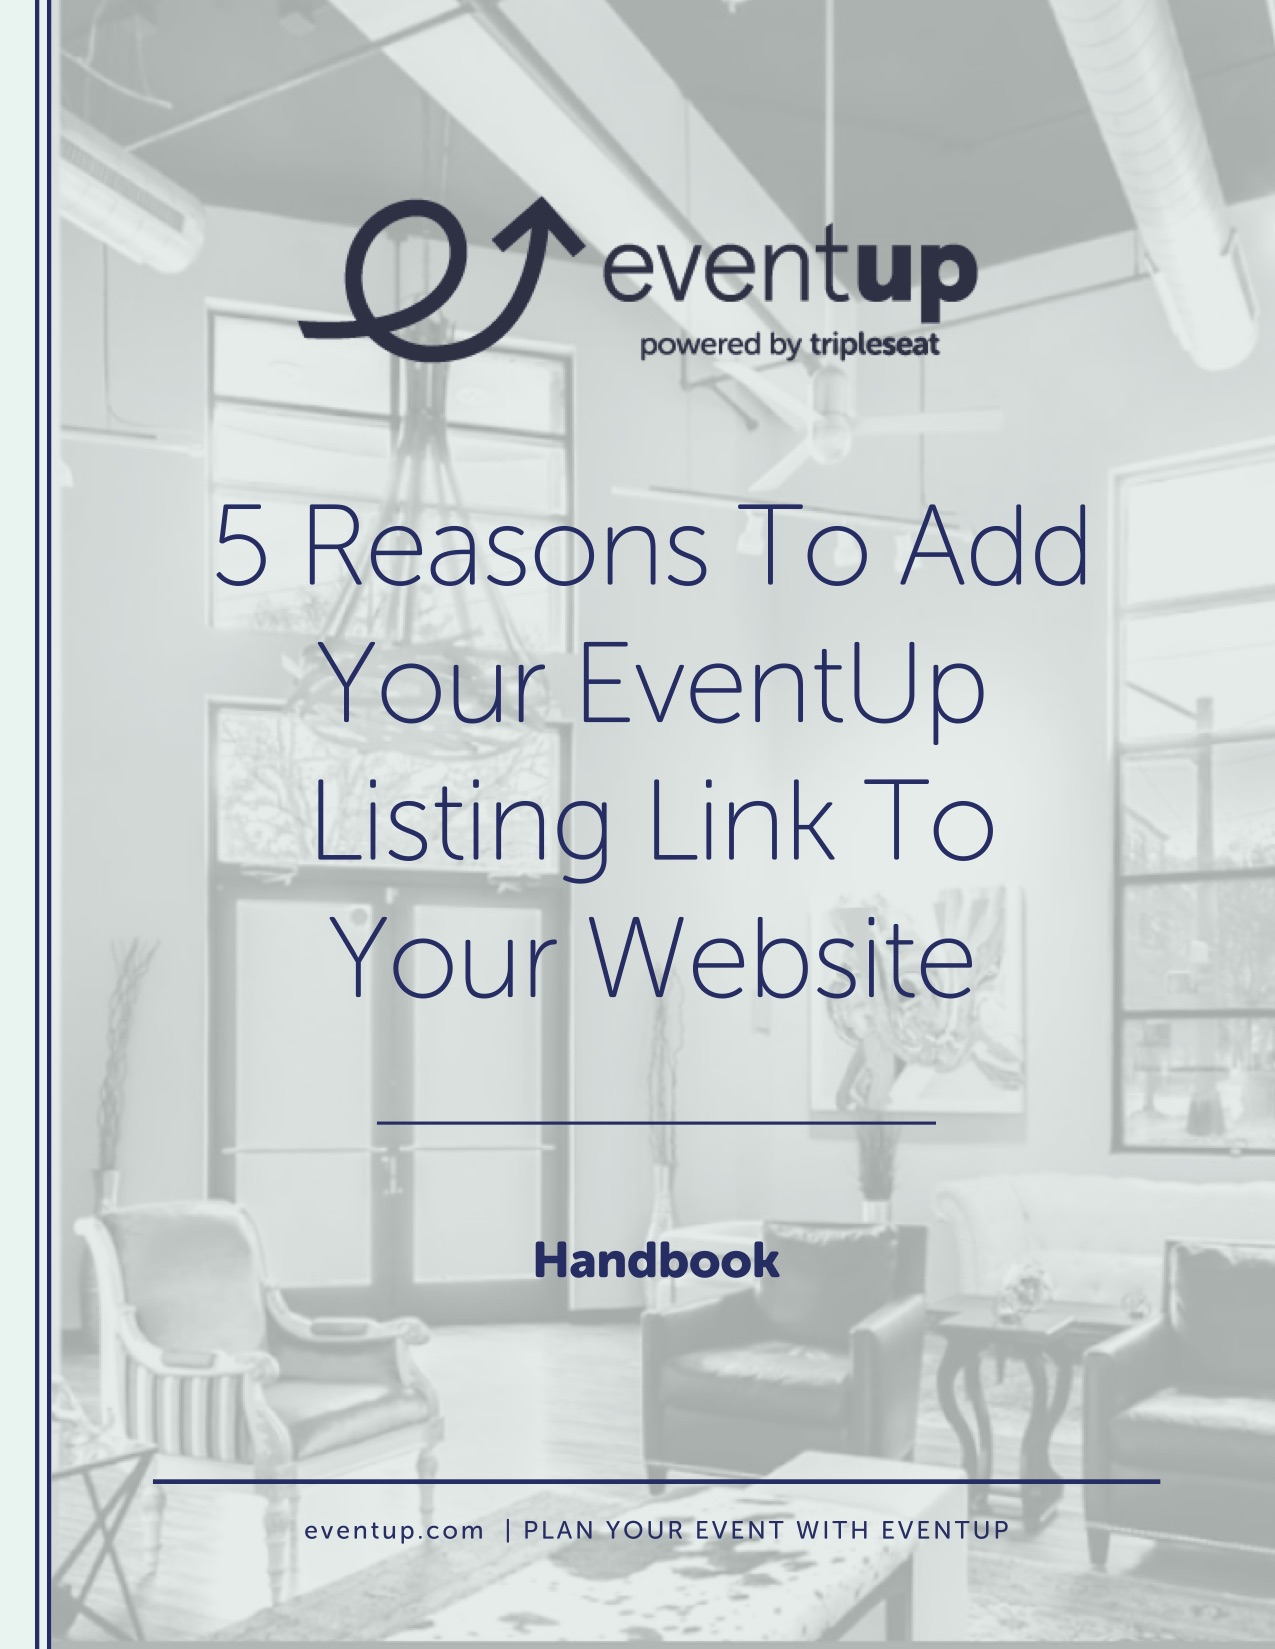 EventUp Handbook Vol 5 -  5 Reasons To Add Your EventUp Listing Link To Your Website